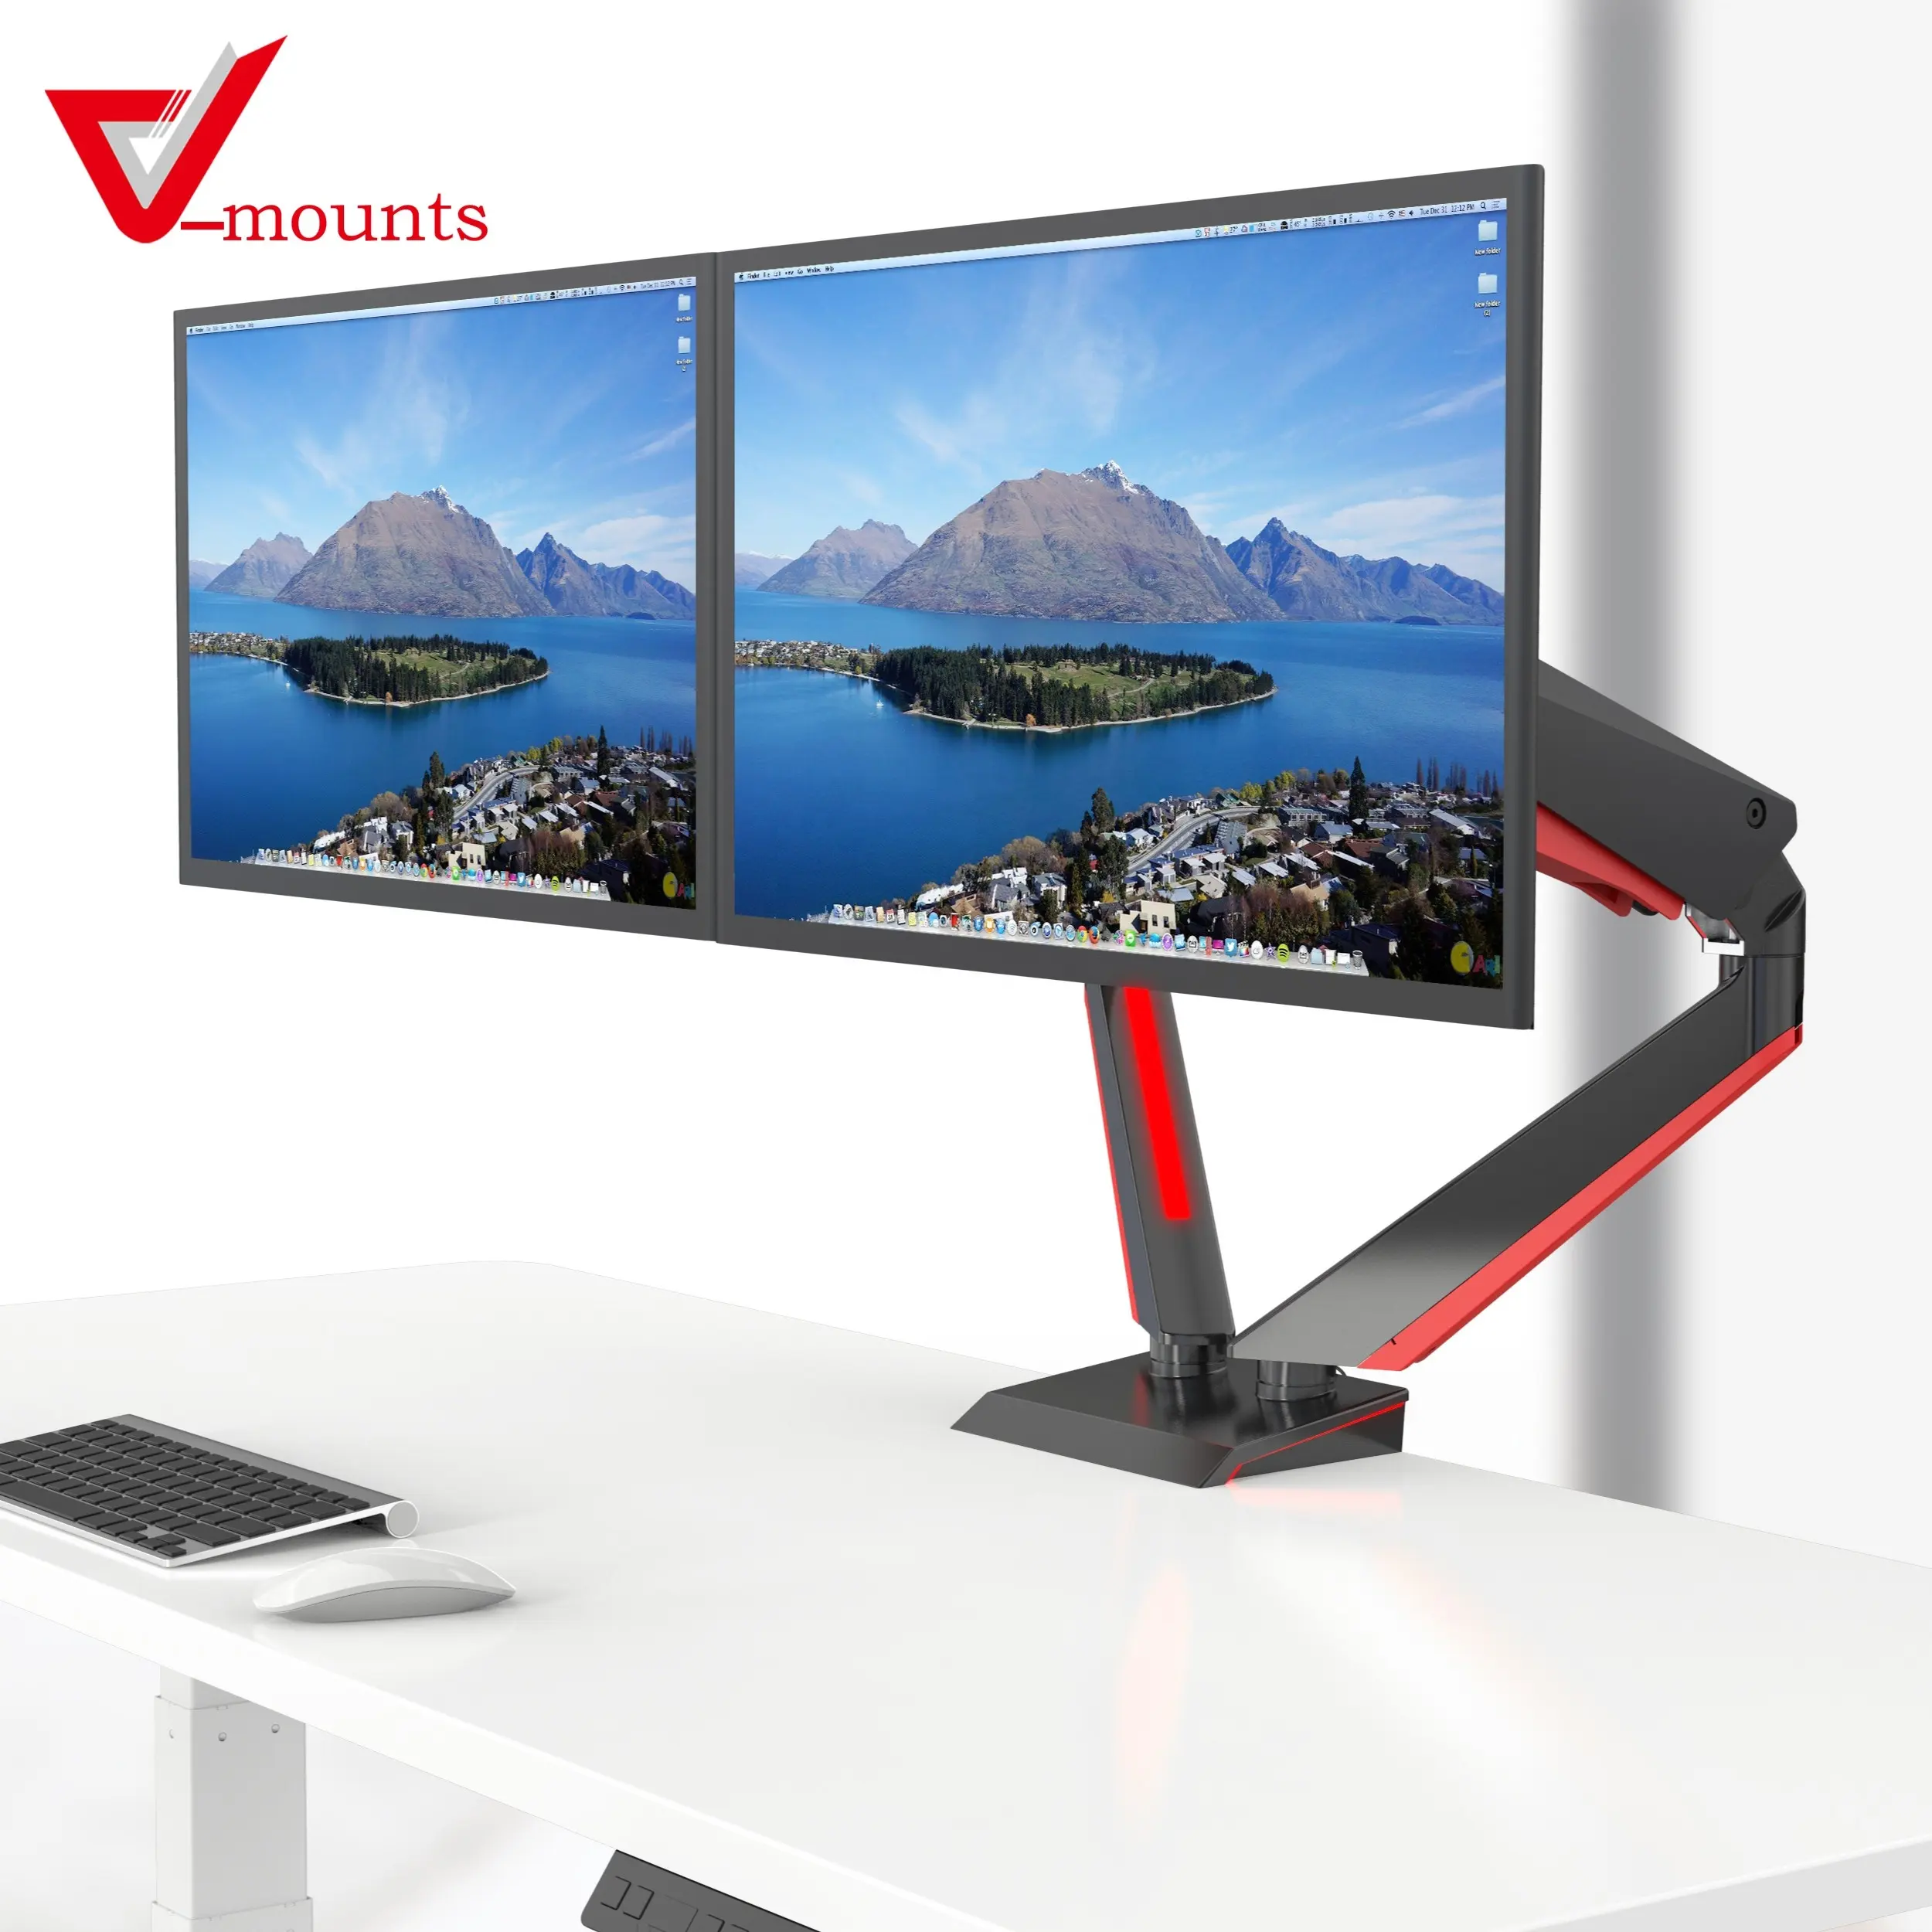 V-mounts Height gas spring adjustable with dual arm monitor stand with color changing light and cable management